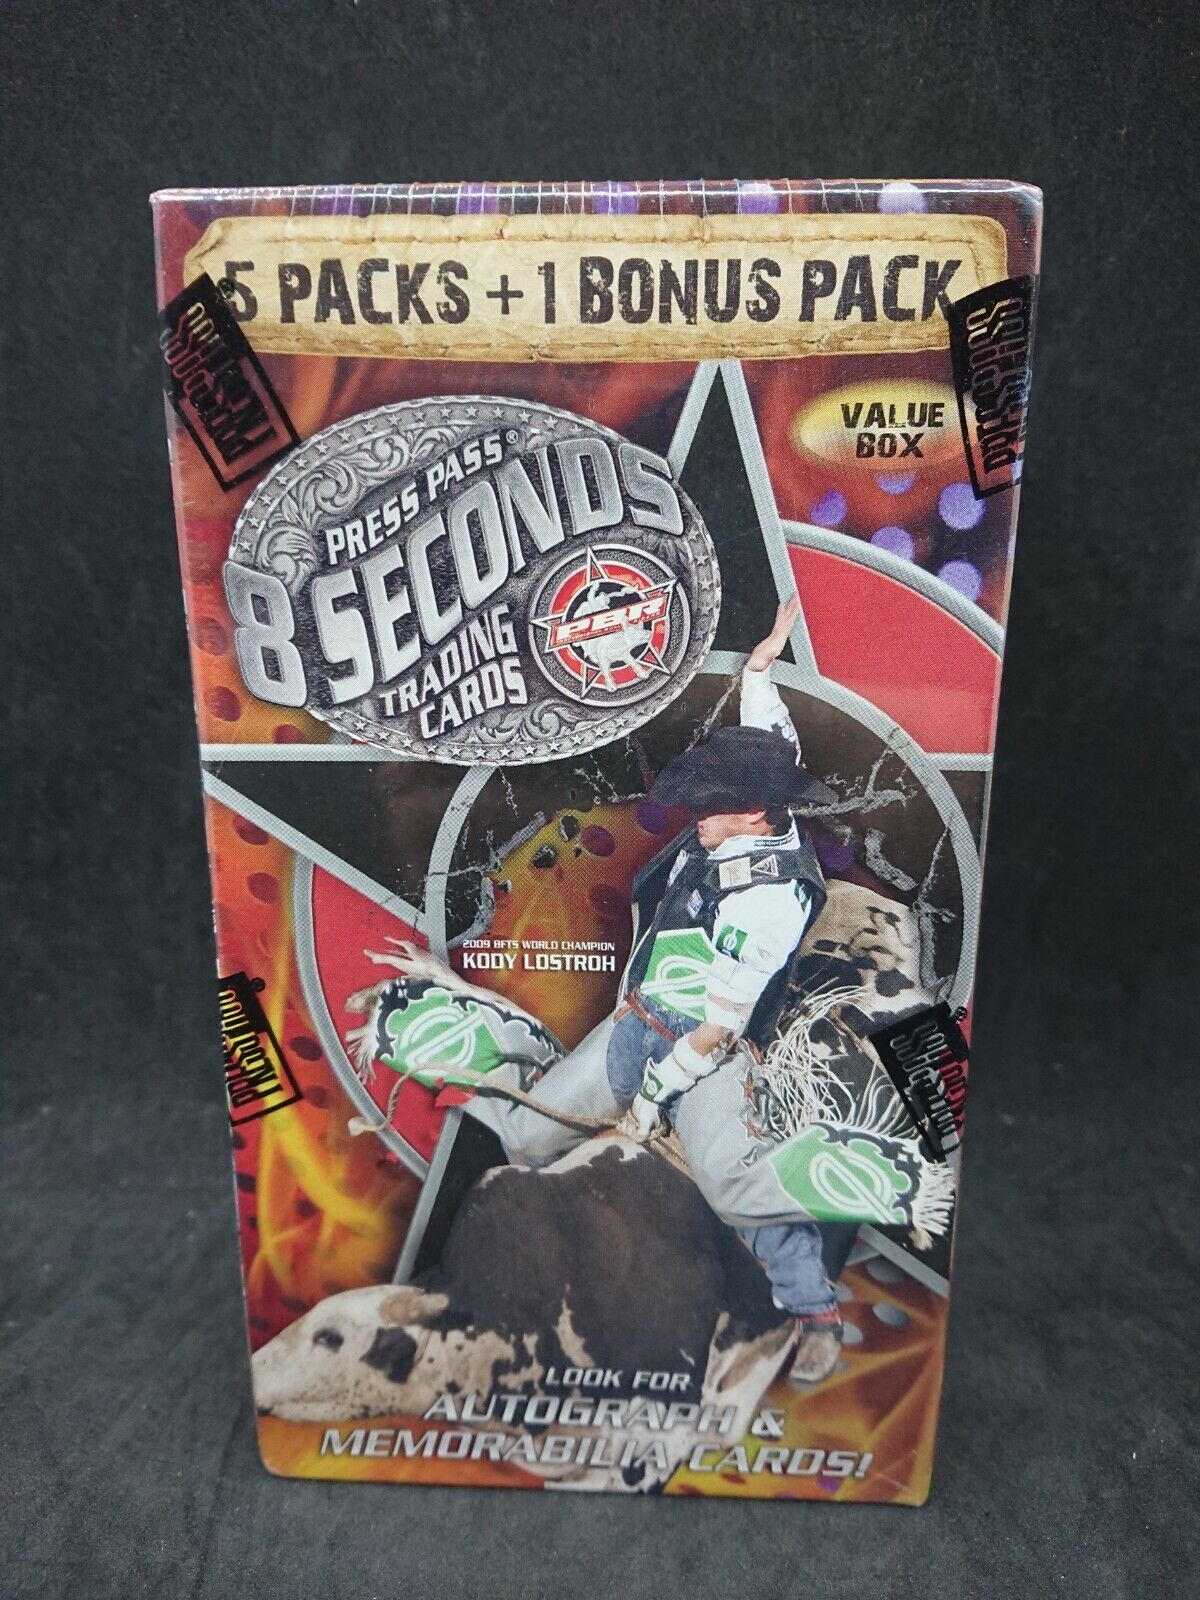 Factory Sealed 2010 Press Pass 8 Seconds Bull Riding Rodeo Trading Card Box 